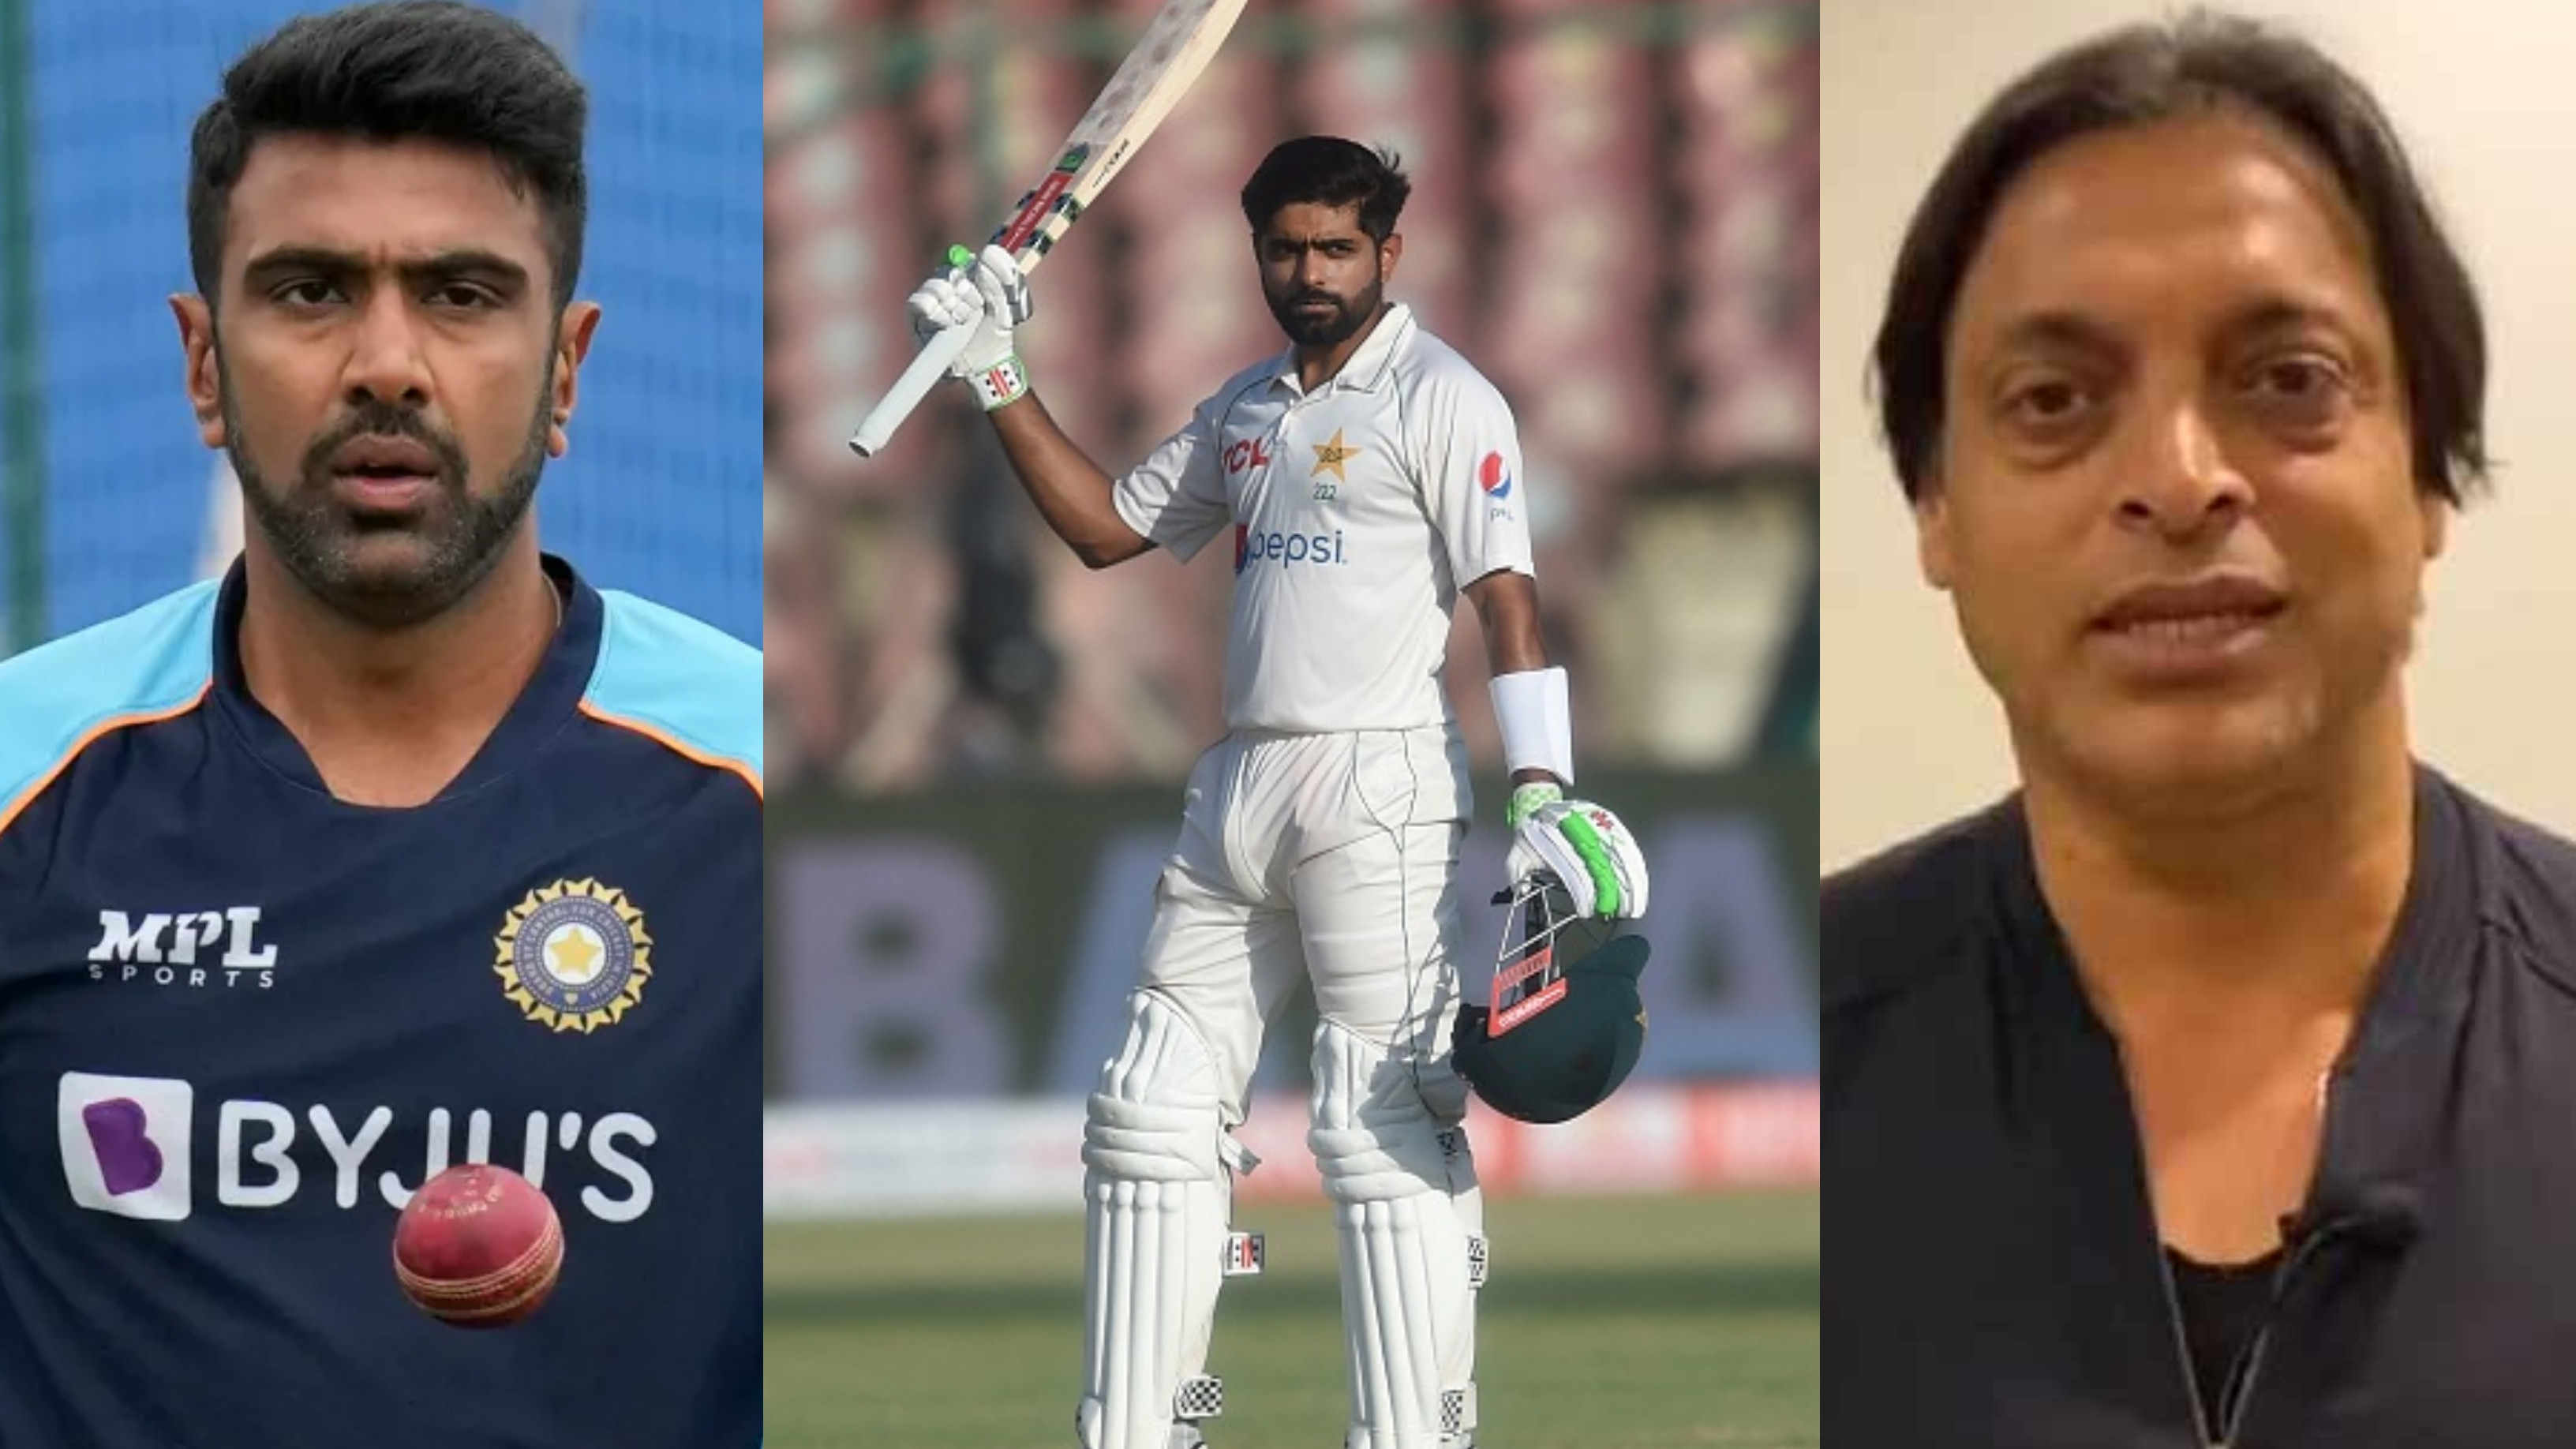 PAK v AUS 2022: Cricket fraternity lauds Babar Azam for his fighting ton on Day 4 of Karachi Test